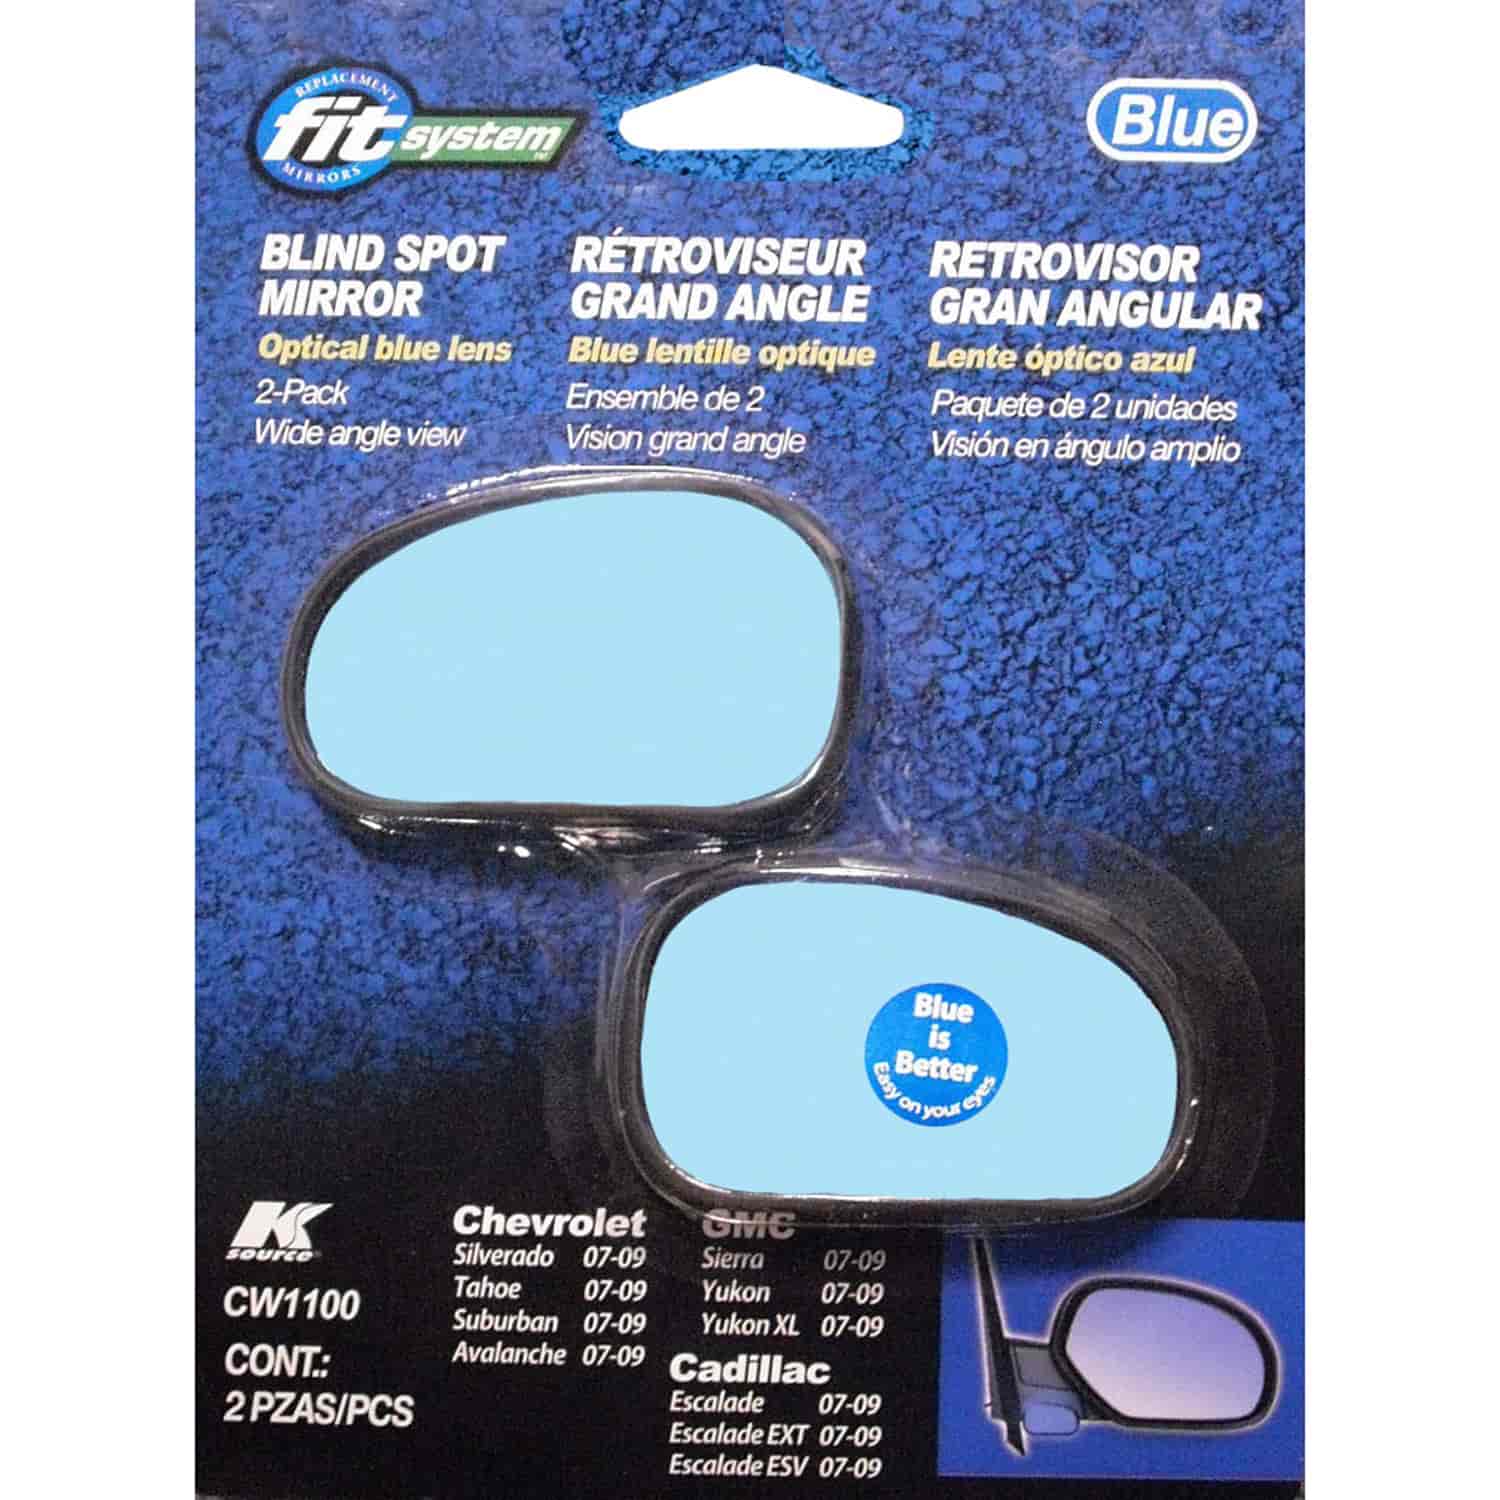 Custom Fit Spot Mirror Chevy 07 & up 2 Pack Optical Blue Lens Optical Blue Lens to Reduce Glare Cust